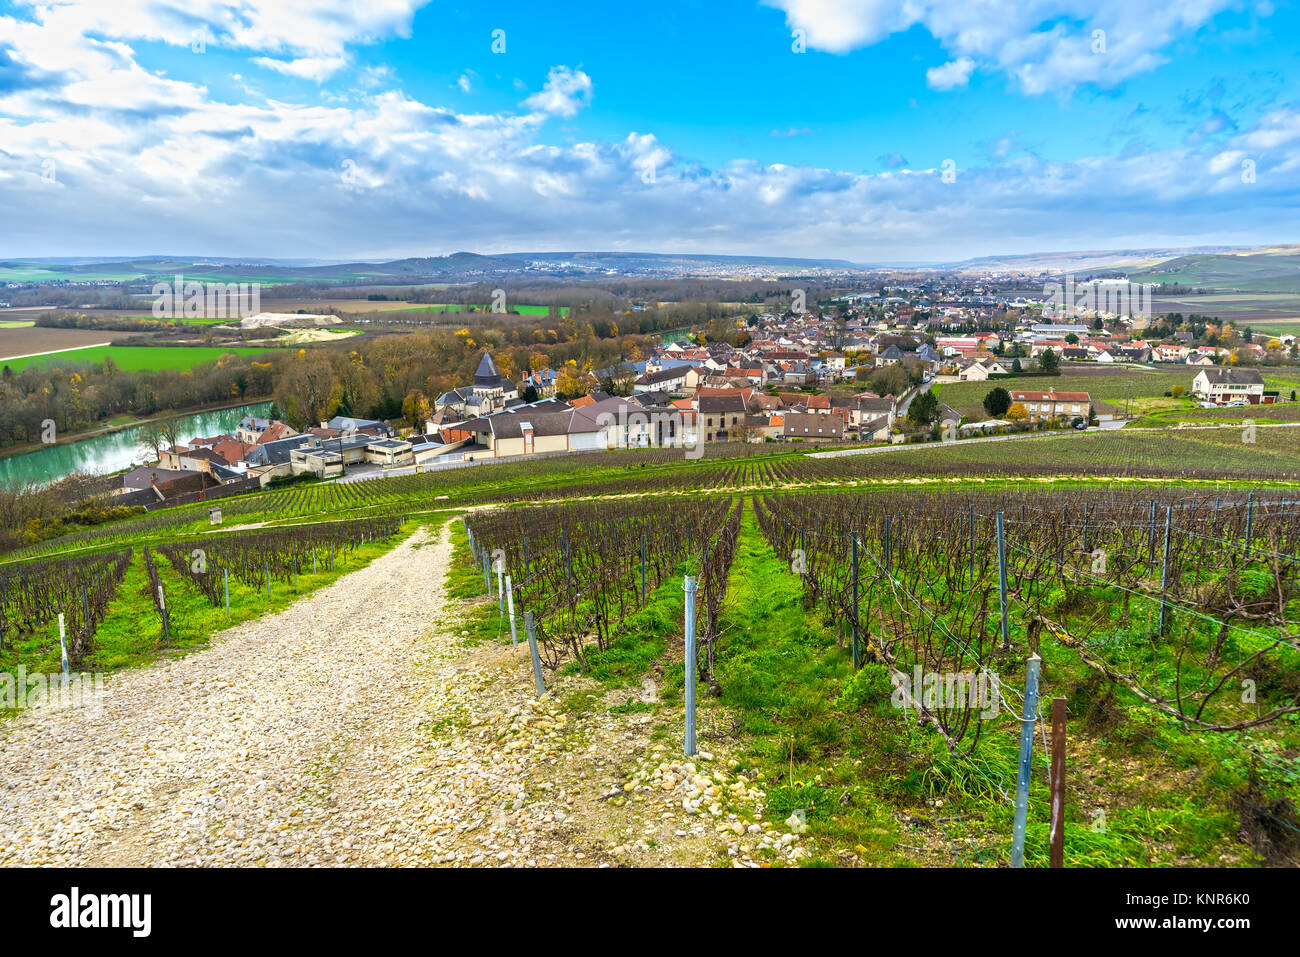 Champagne vineyards in the village of Mareuil sur ay, Epernay, Marne, Champagne region, France Stock Photo